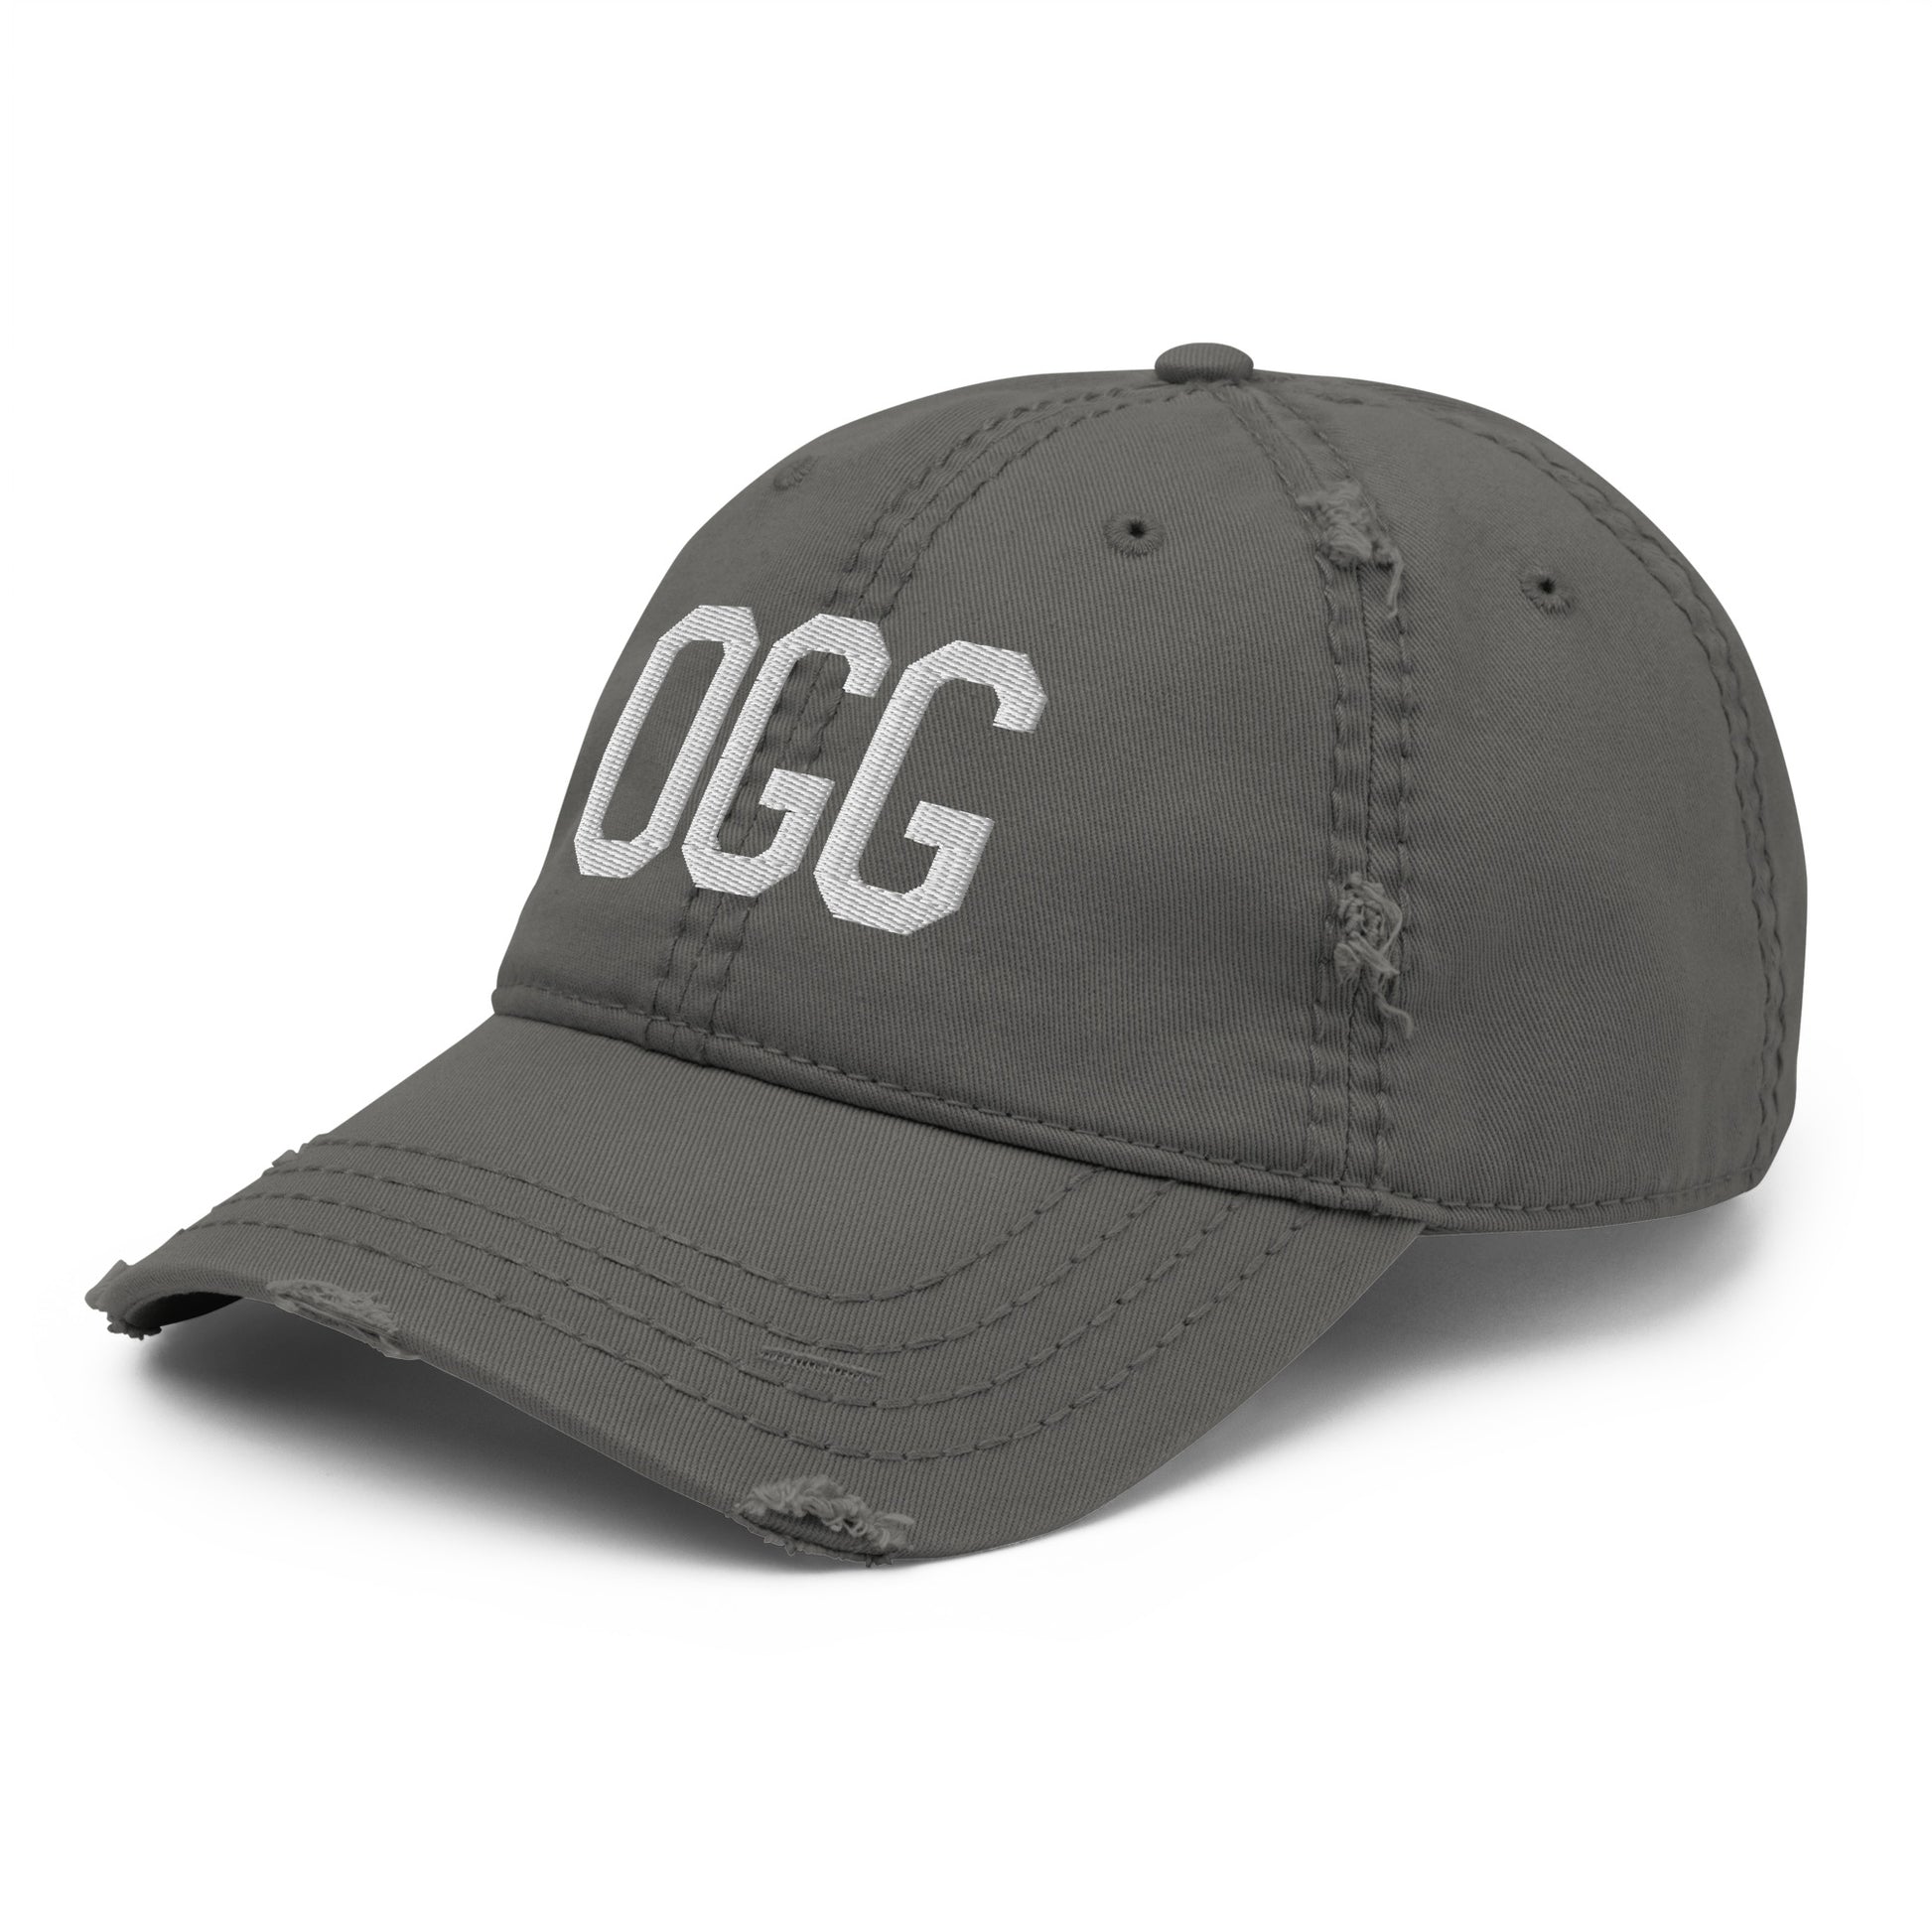 Airport Code Distressed Hat - White • OGG Maui • YHM Designs - Image 16